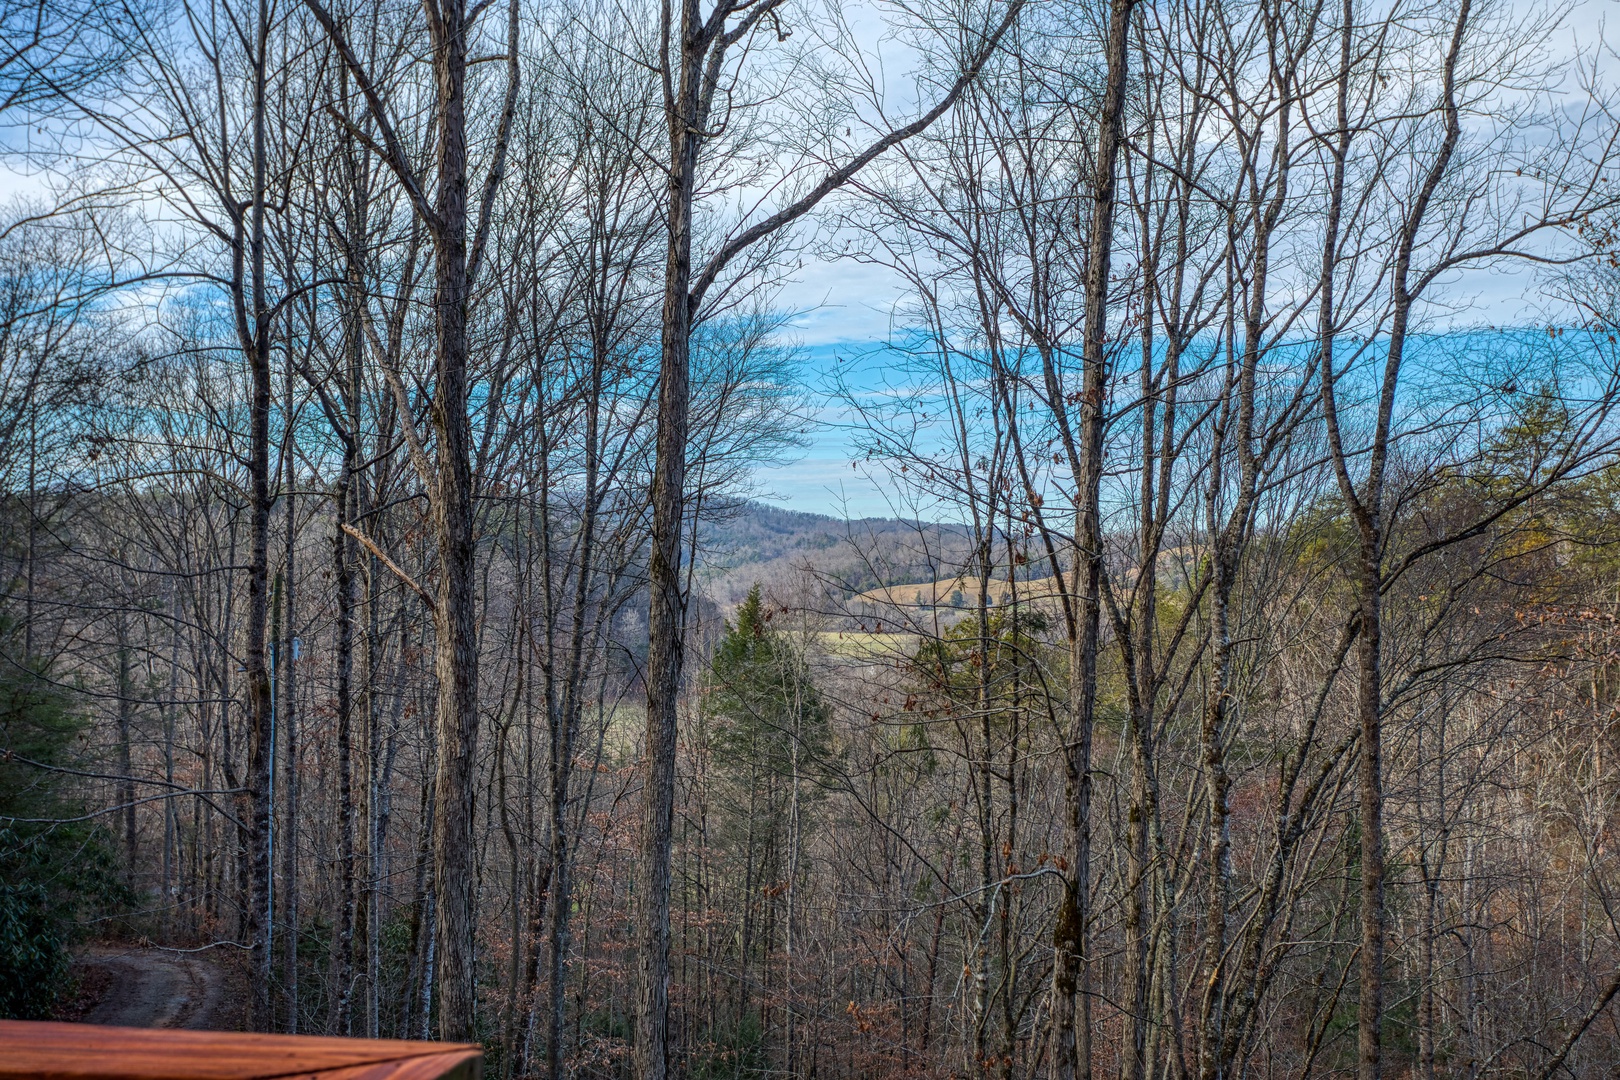 Winter views through the trees at Moonshiner's Ridge, a 1-bedroom cabin rental located in Pigeon Forge